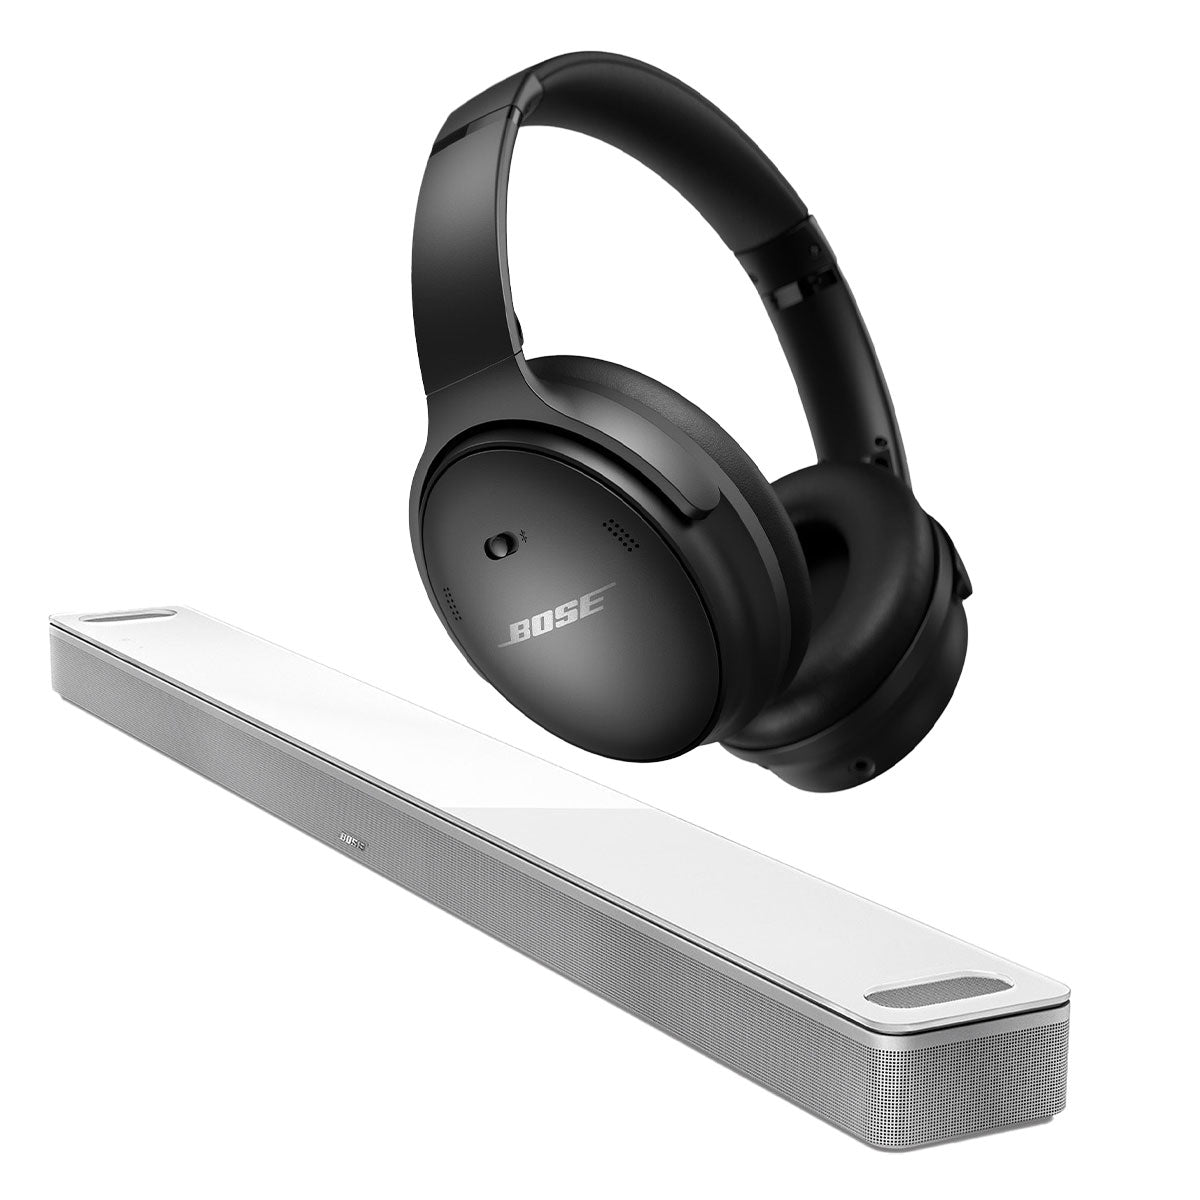 Bose QuietComfort 45 Wireless Noise Canceling Headphones (Black) and Bose Smart Soundbar 900 with Dolby Atmos (White)